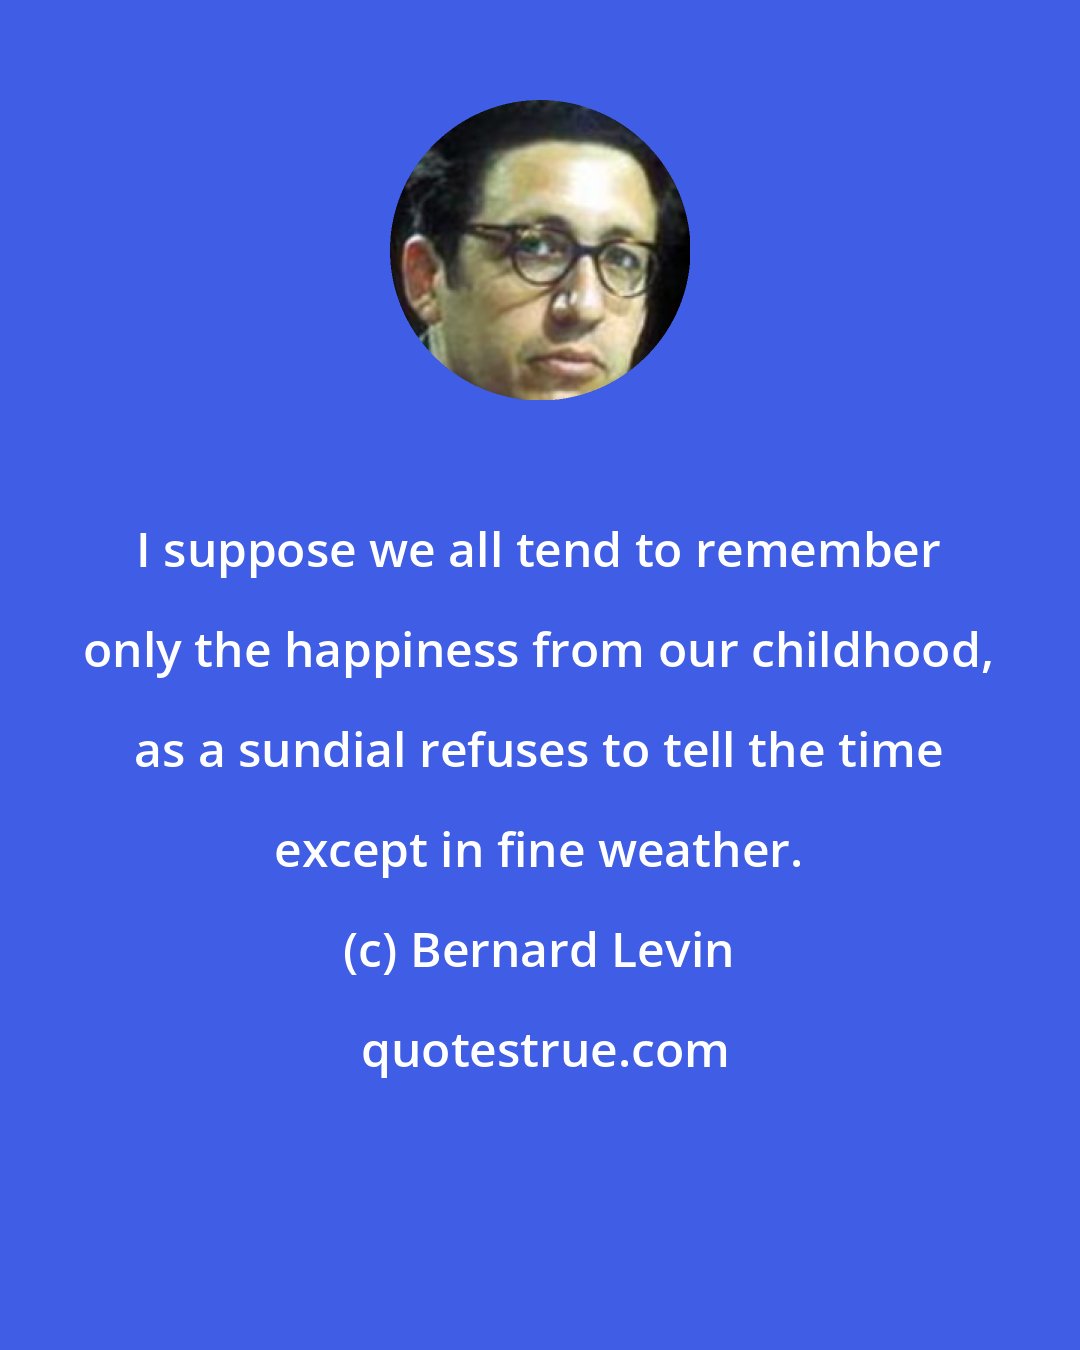 Bernard Levin: I suppose we all tend to remember only the happiness from our childhood, as a sundial refuses to tell the time except in fine weather.